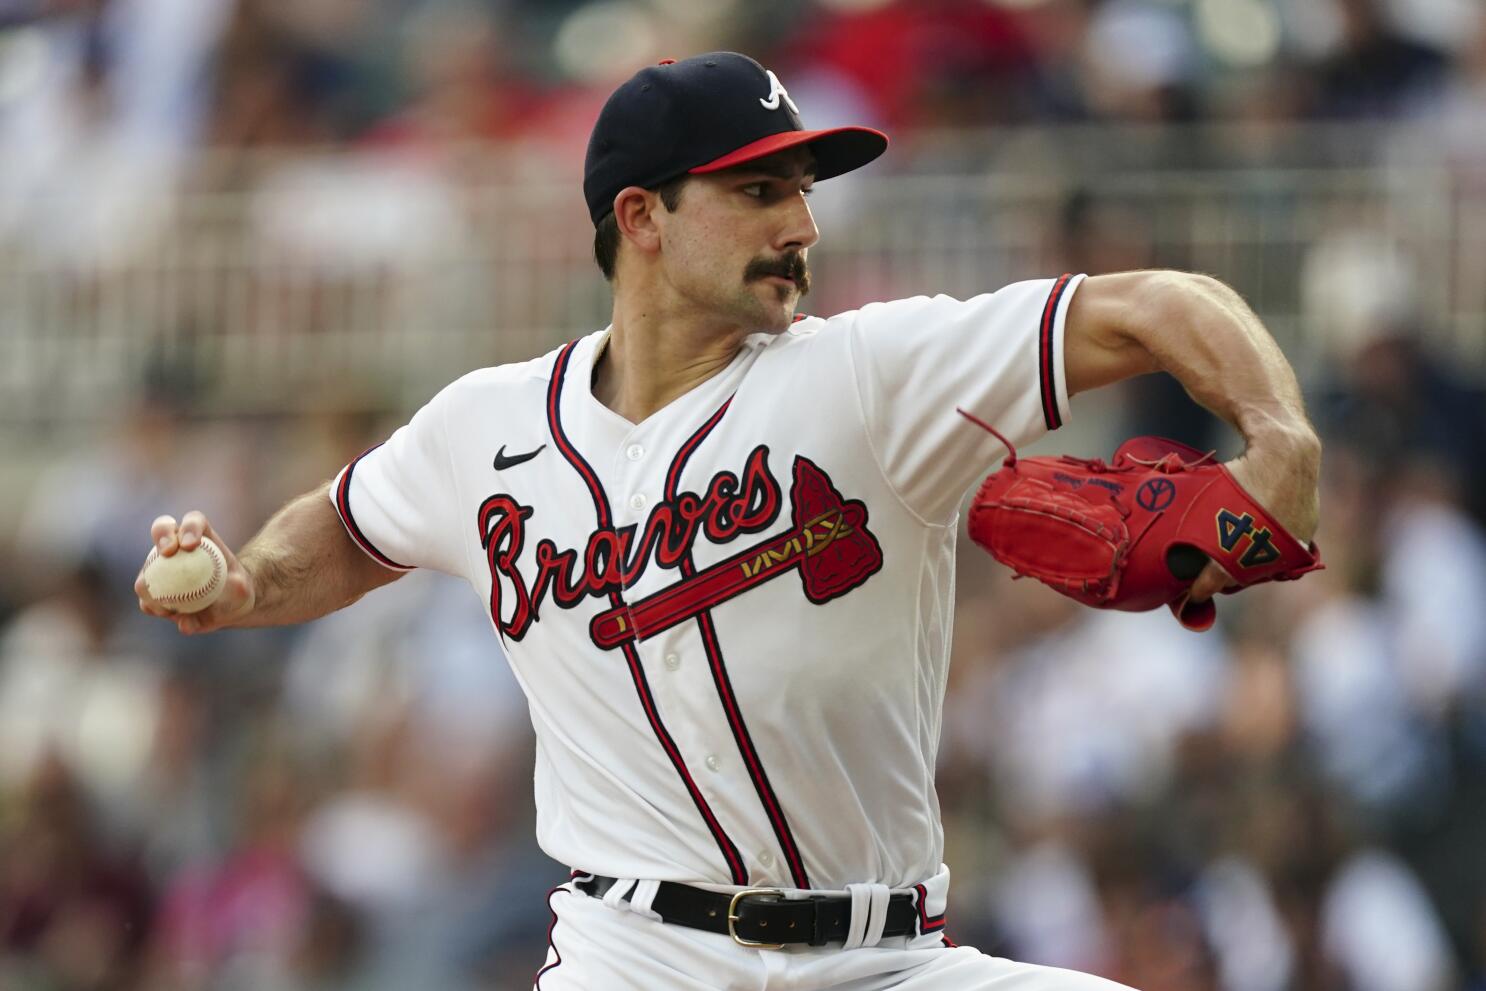 Braves News: Braves' new uniforms, Olson and Rosario go wild, more